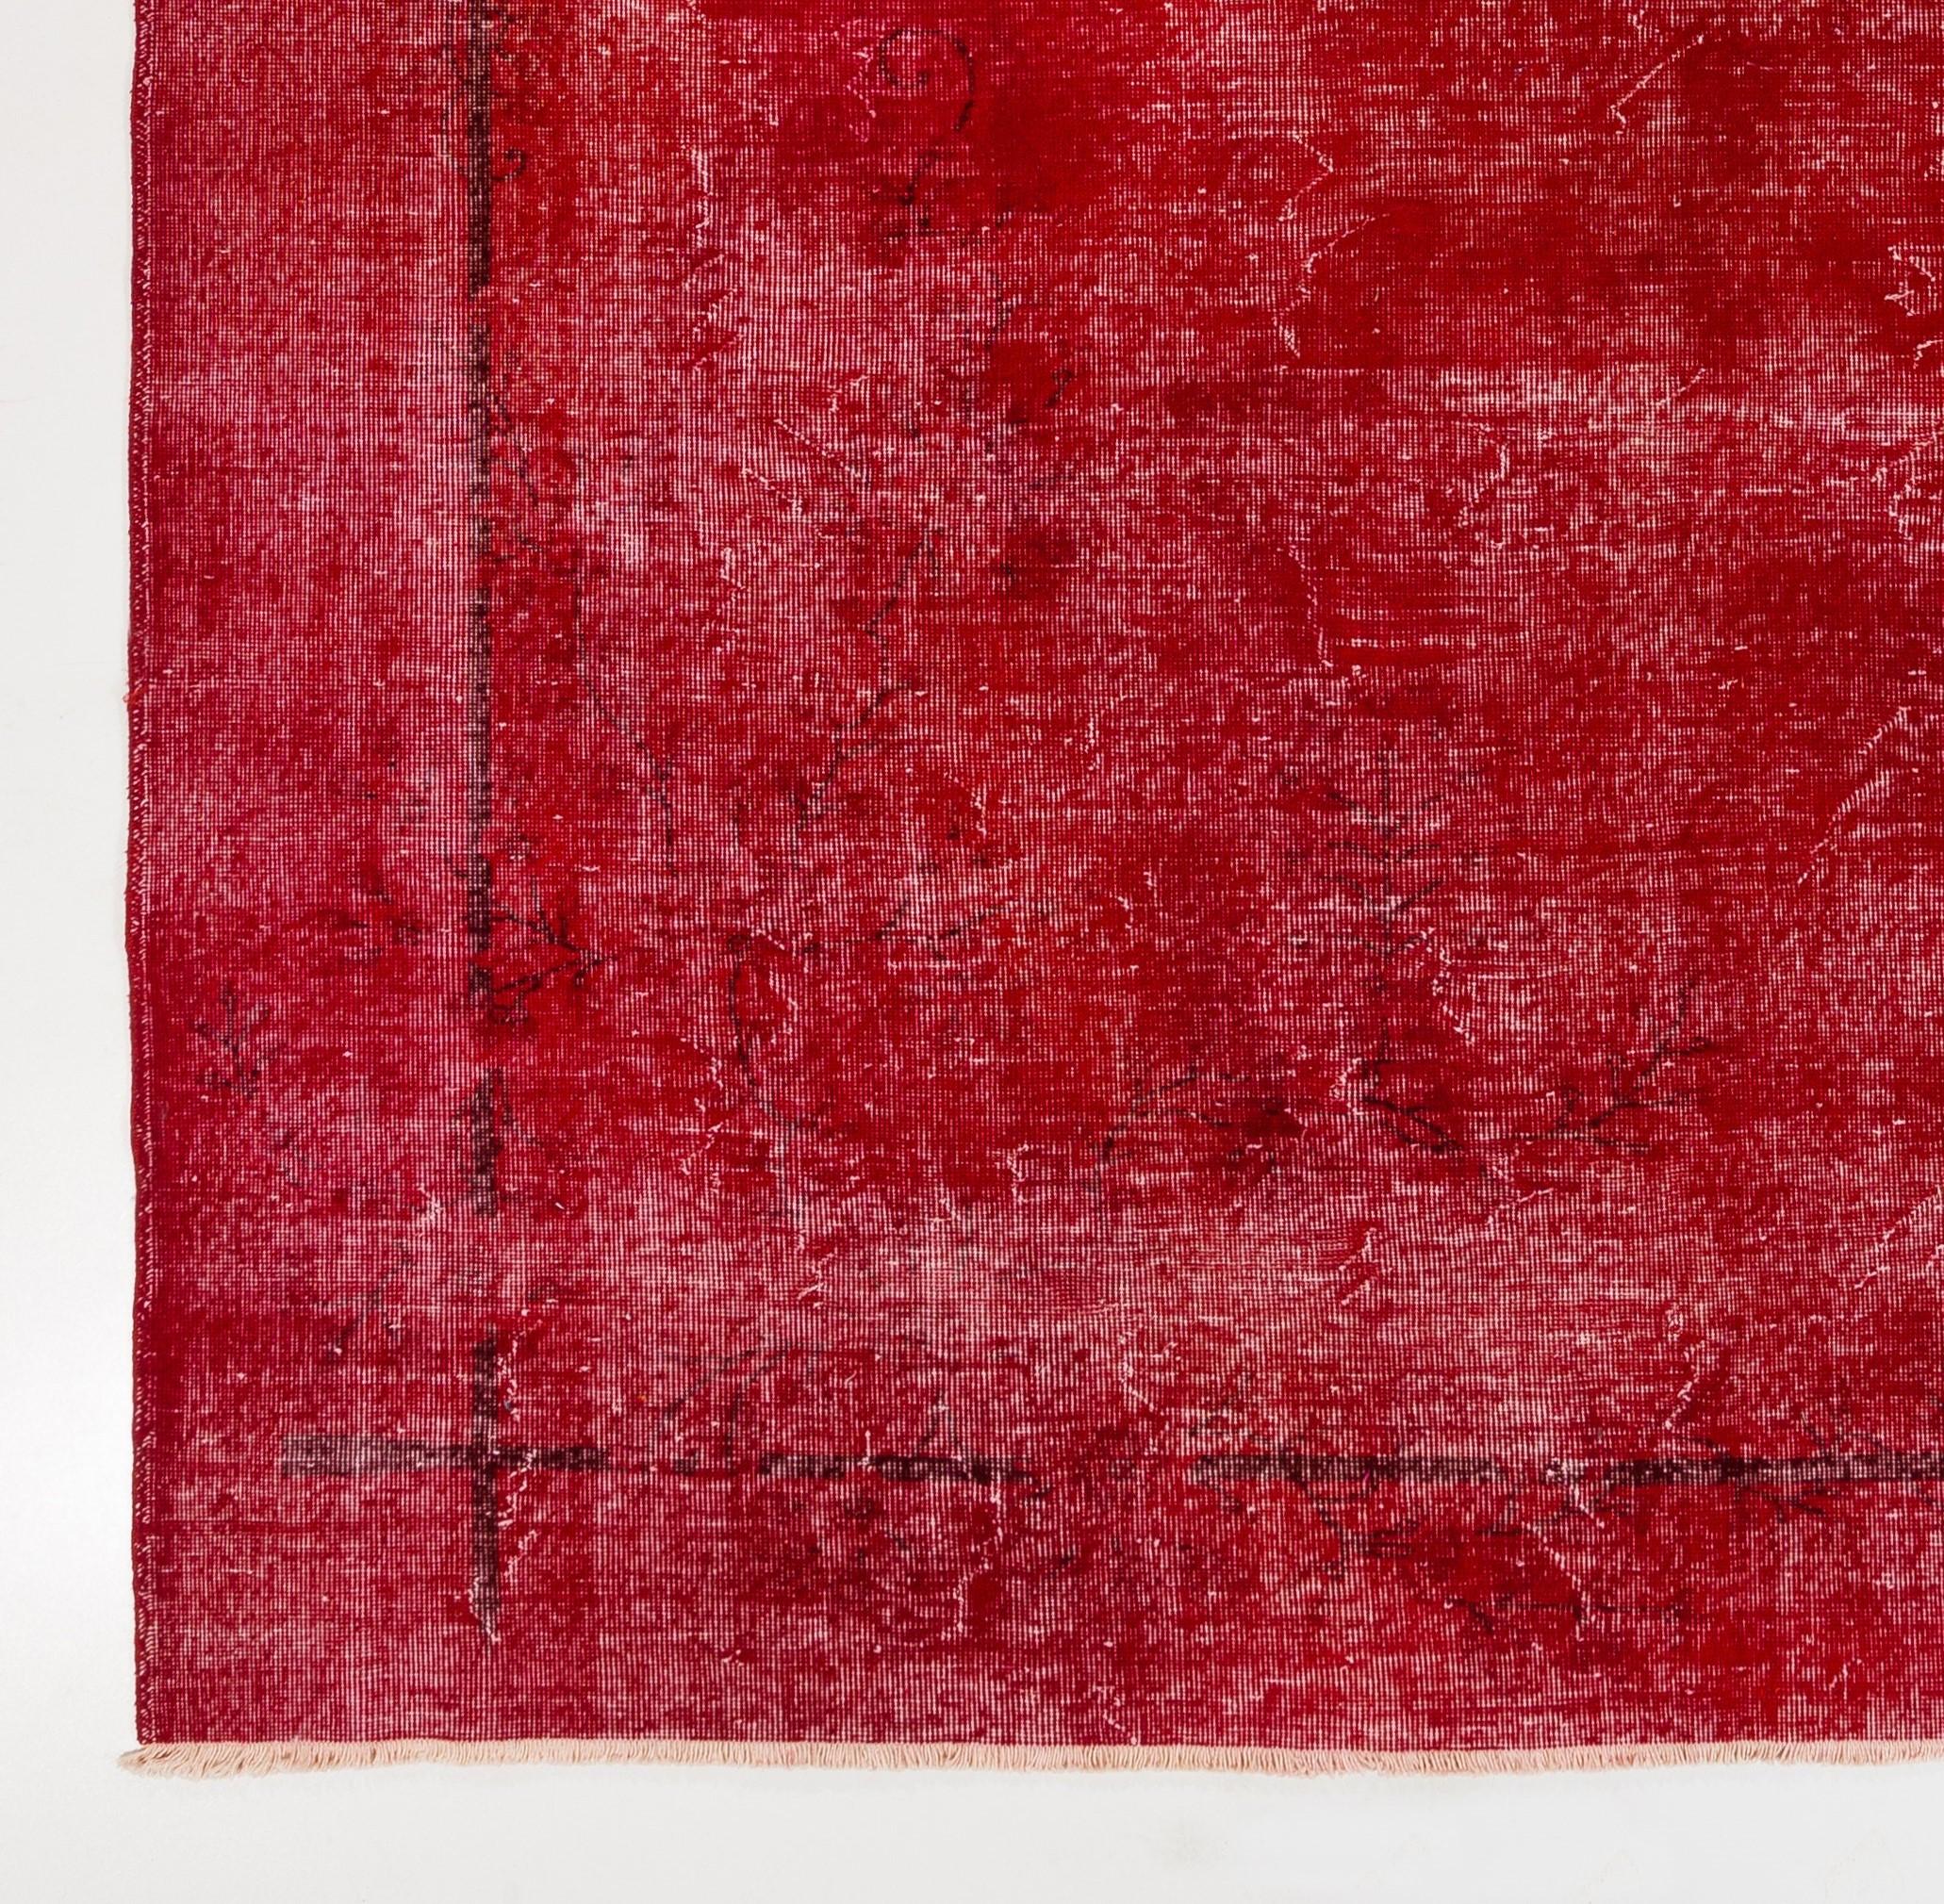 8.7 x 11 Ft.
A midcentury Turkish rug re-dyed in red color.
Finely hand knotted, low wool pile on cotton foundation. Deep washed.
Sturdy and can be used on a high traffic area, suitable for both residential and commercial interiors.

   